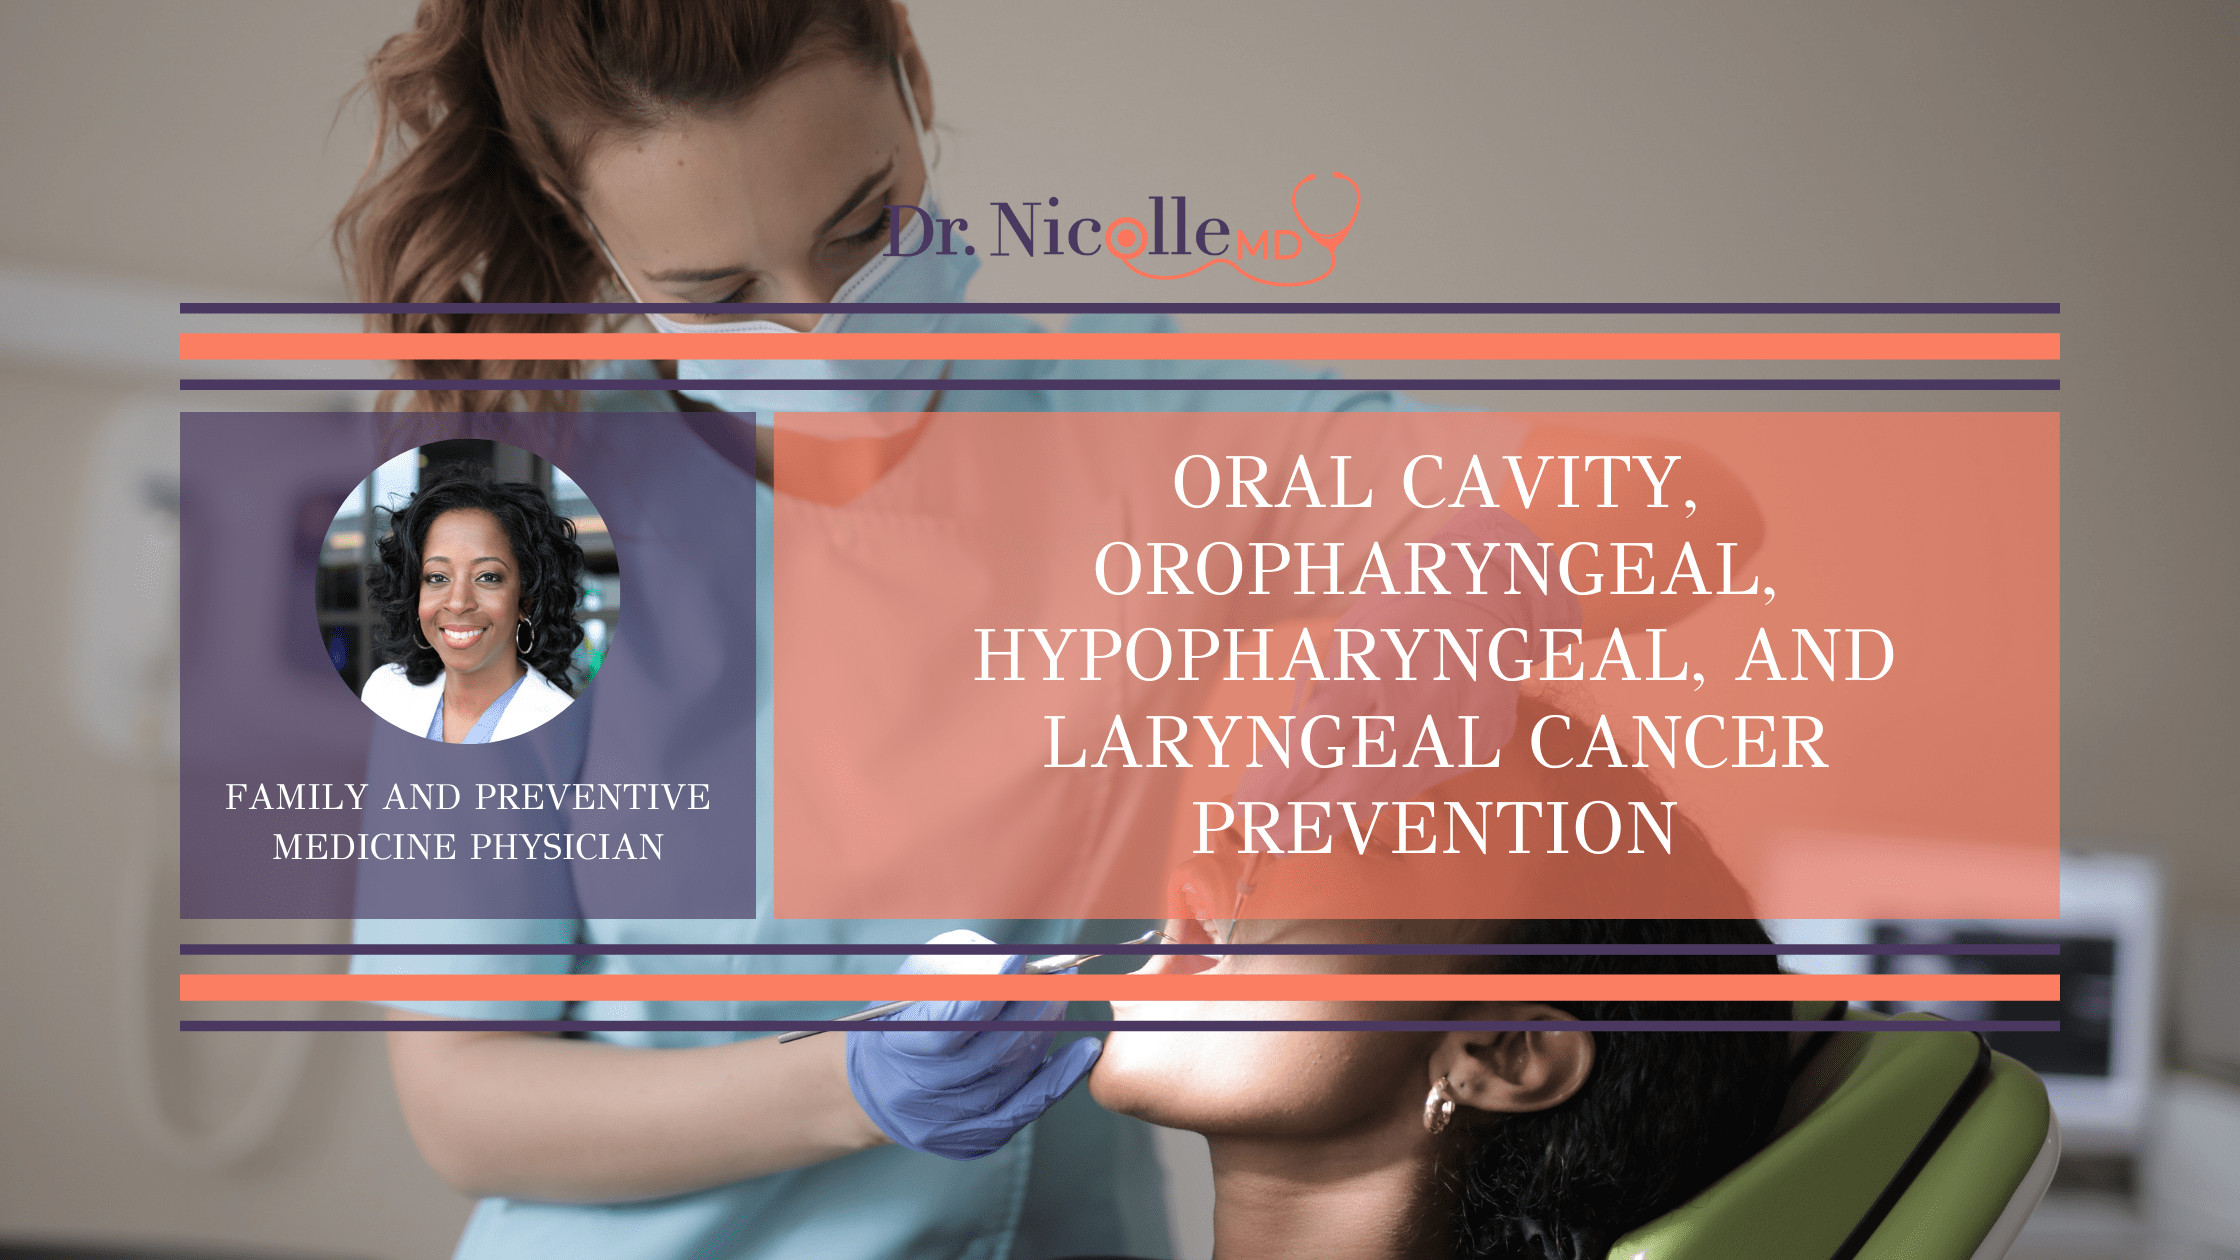 11Oral Cavity, Oropharyngeal, Hypopharyngeal, and Laryngeal Cancer Prevention